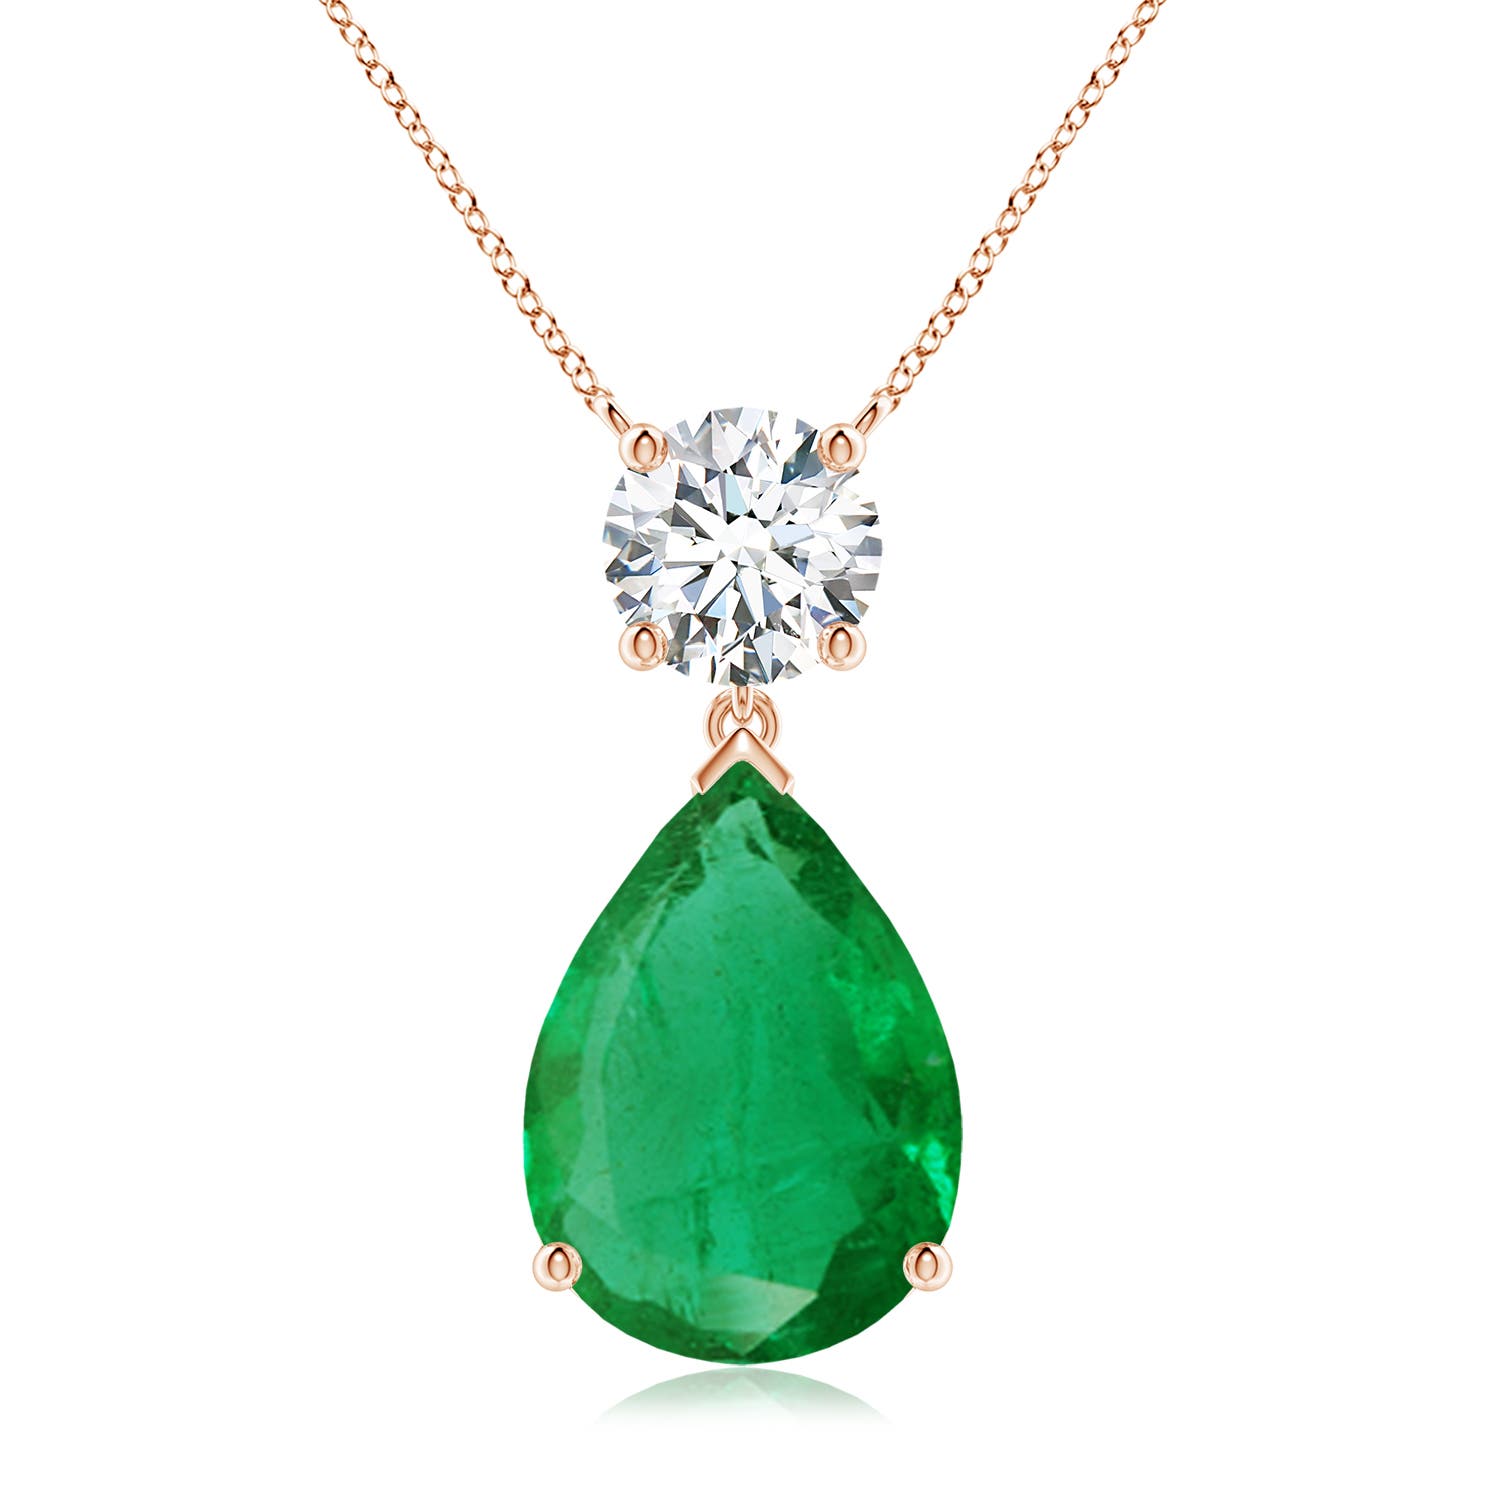 AA - Emerald / 7.6 CT / 14 KT Rose Gold